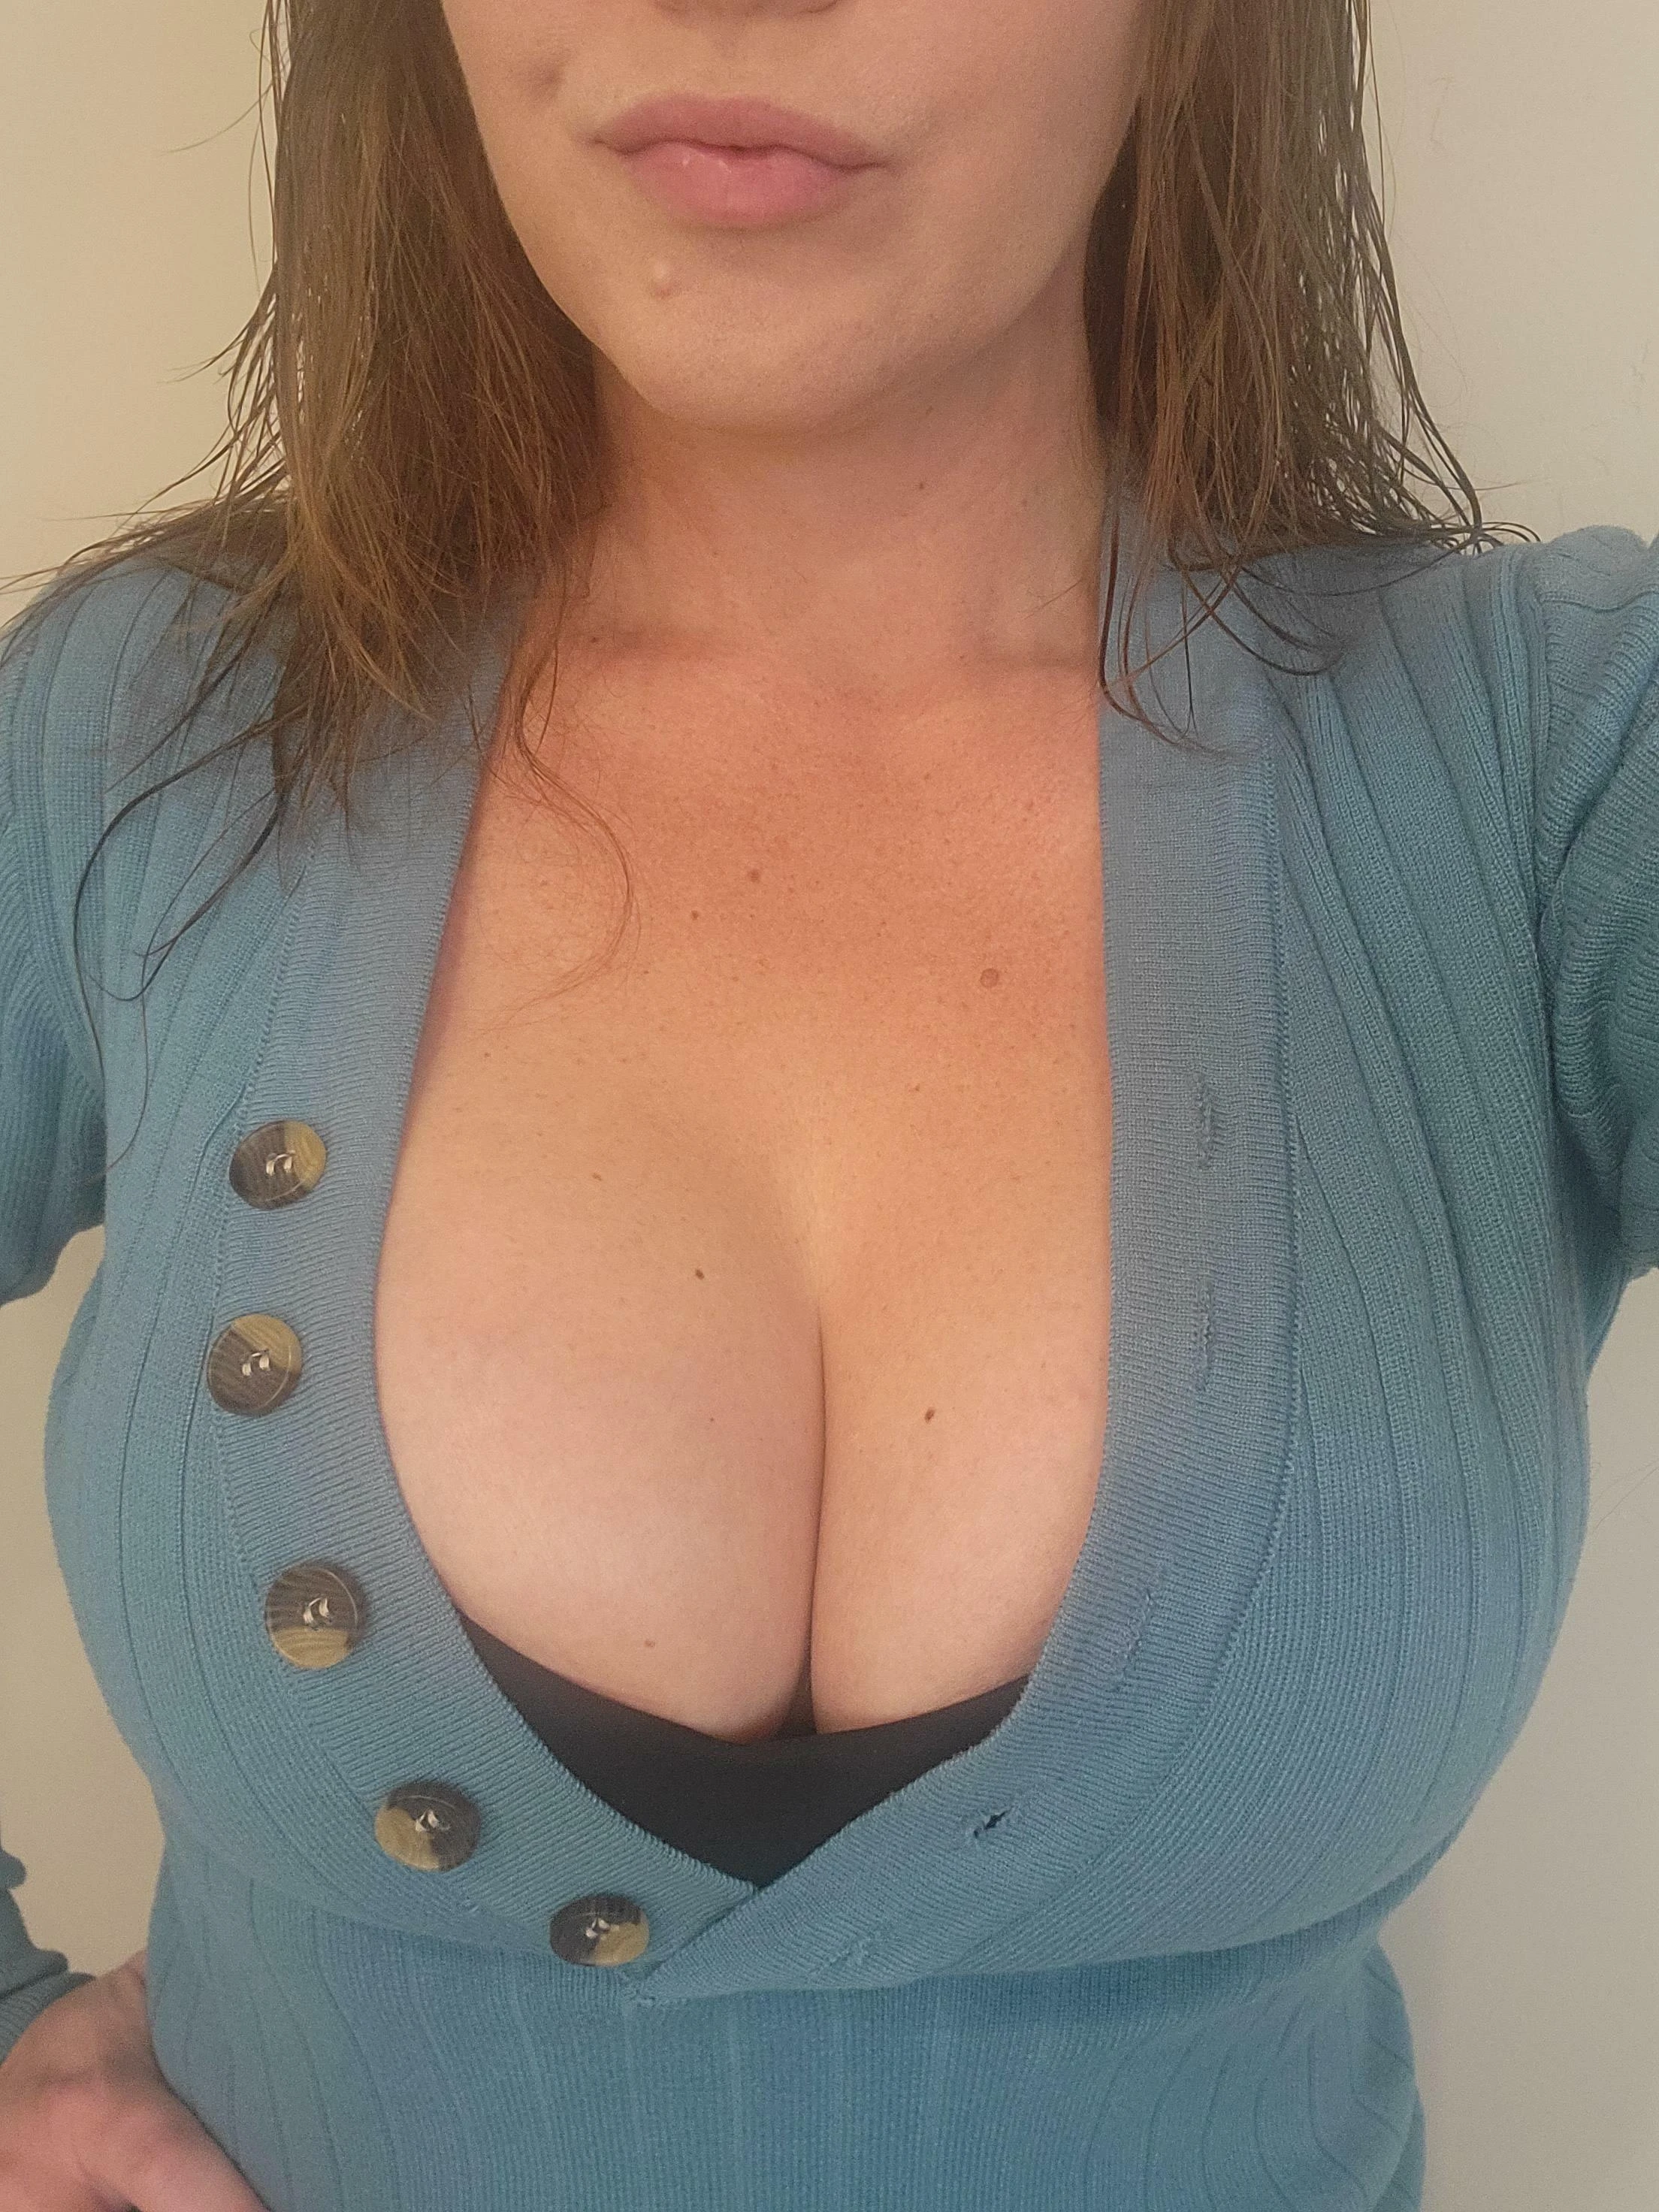 Too revealing to wear to work?